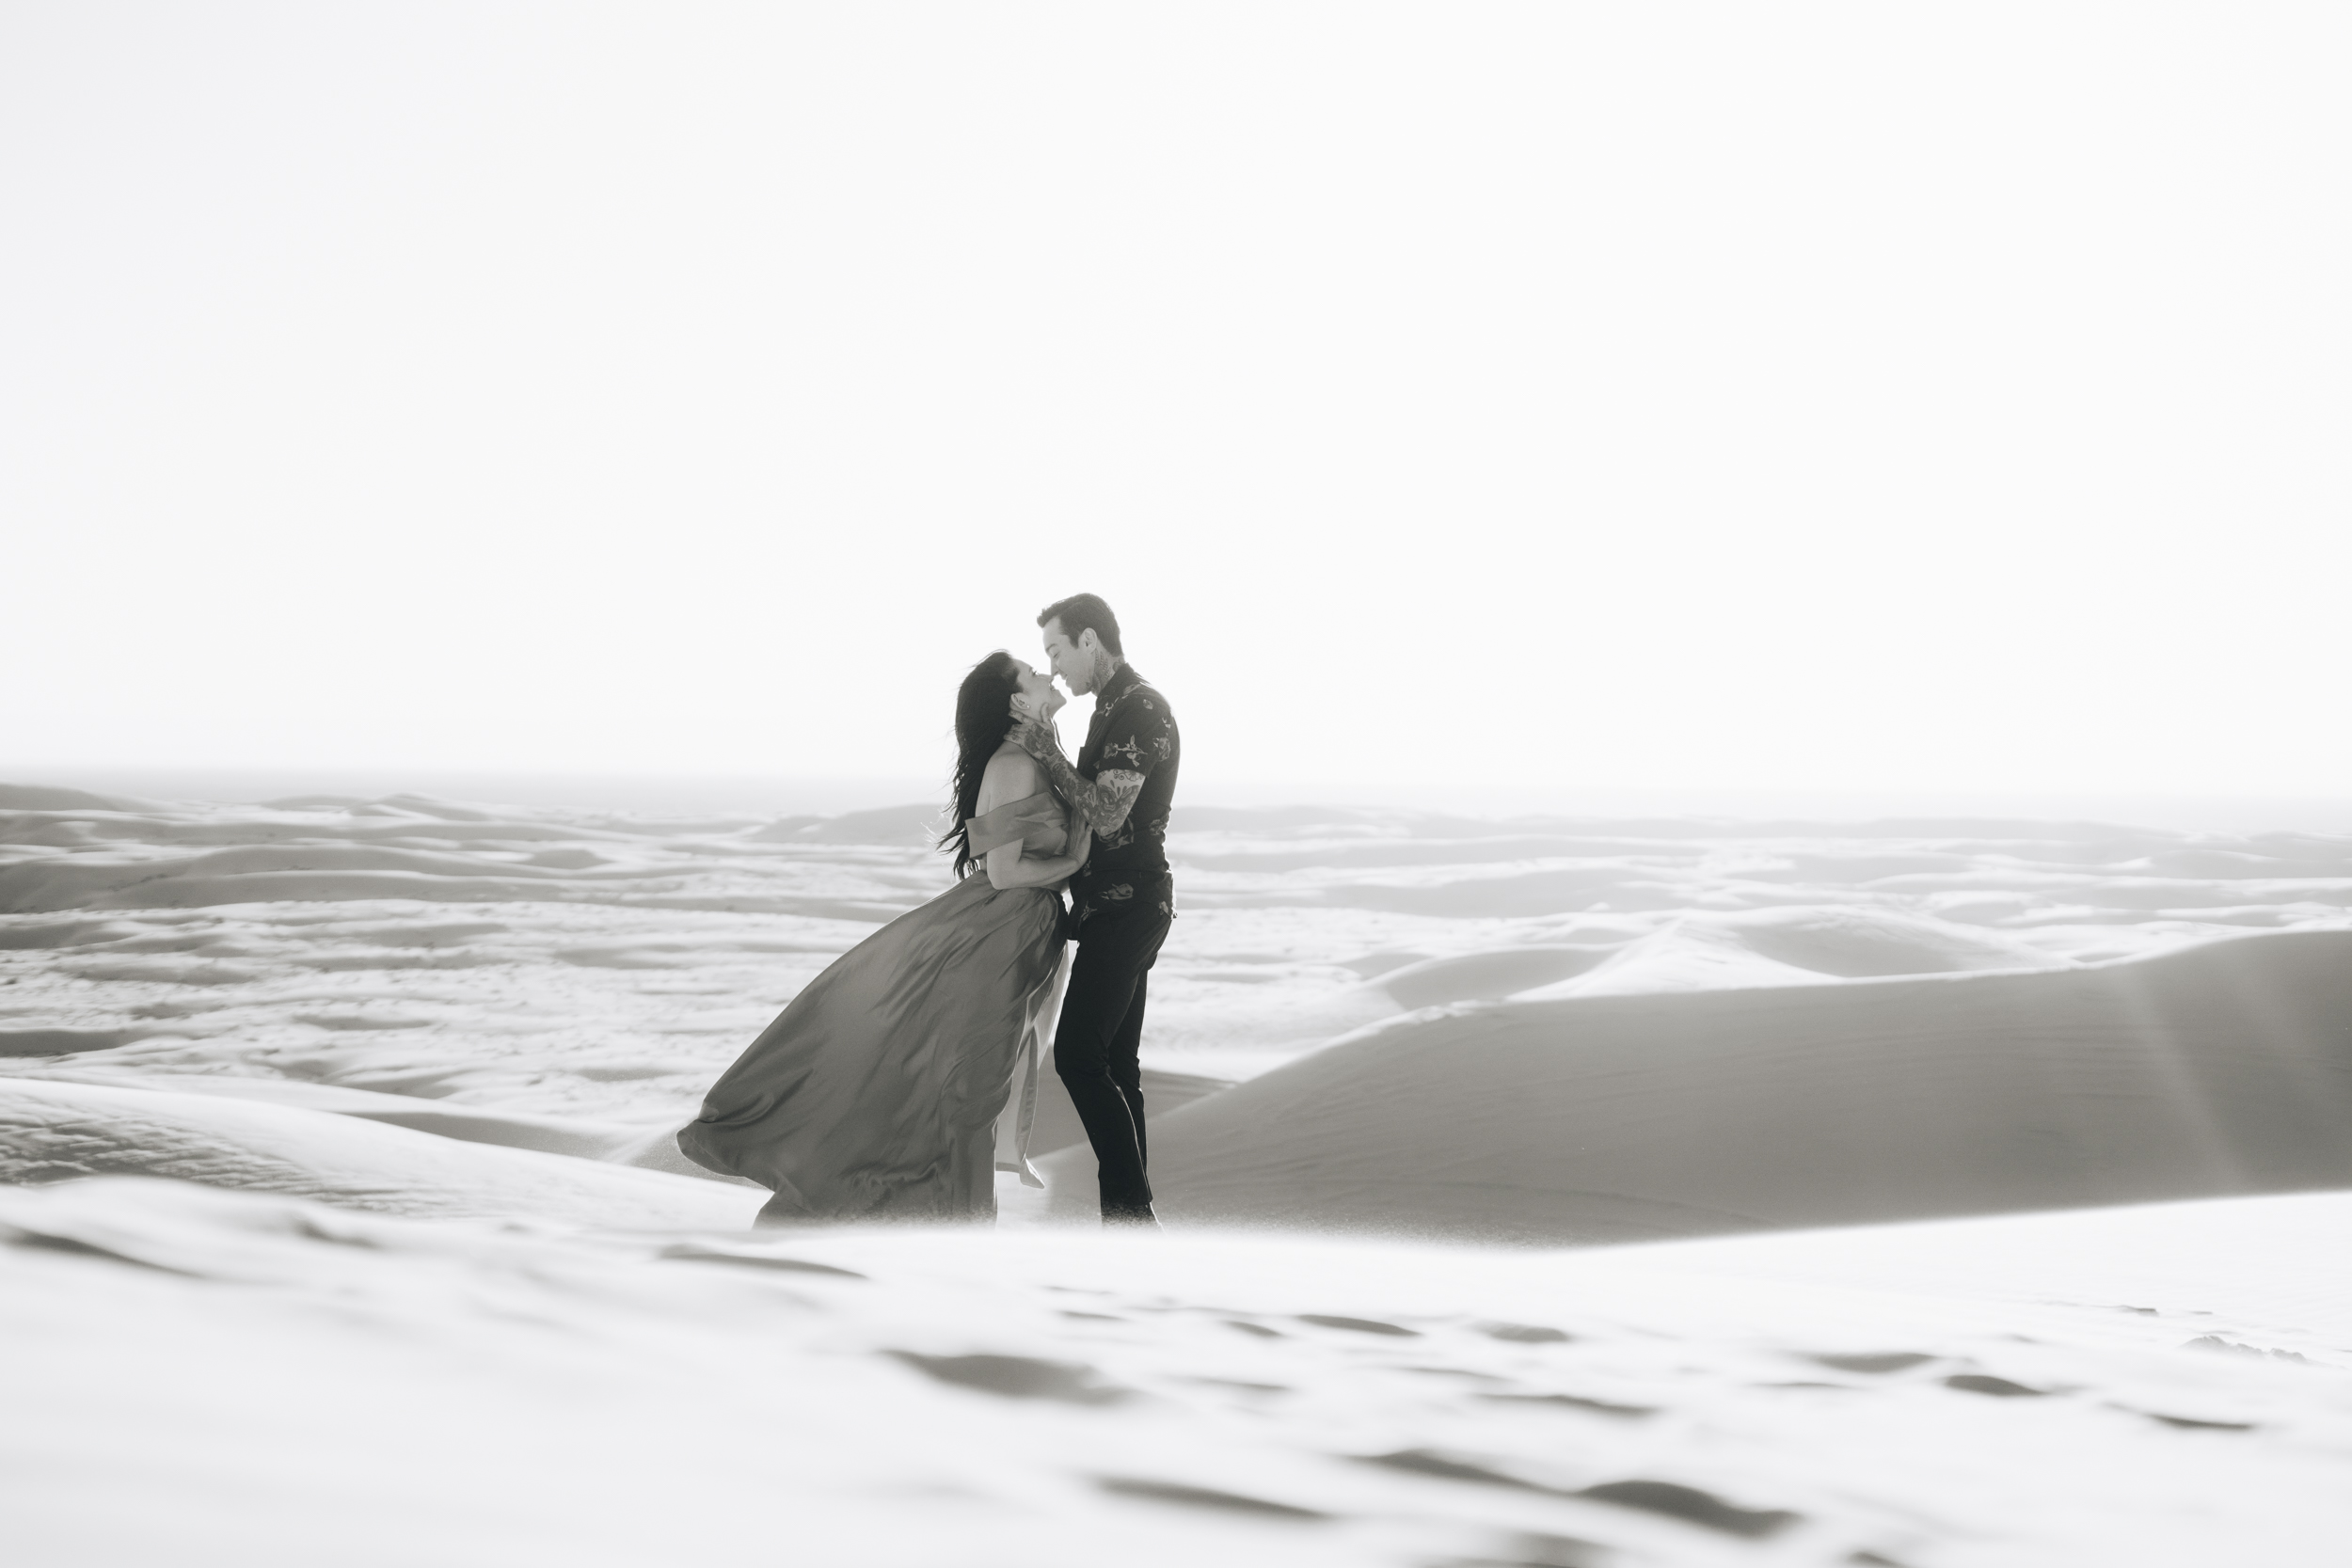 Erin & Tony's Imperial Sand Dunes Engagement Photos (part one)